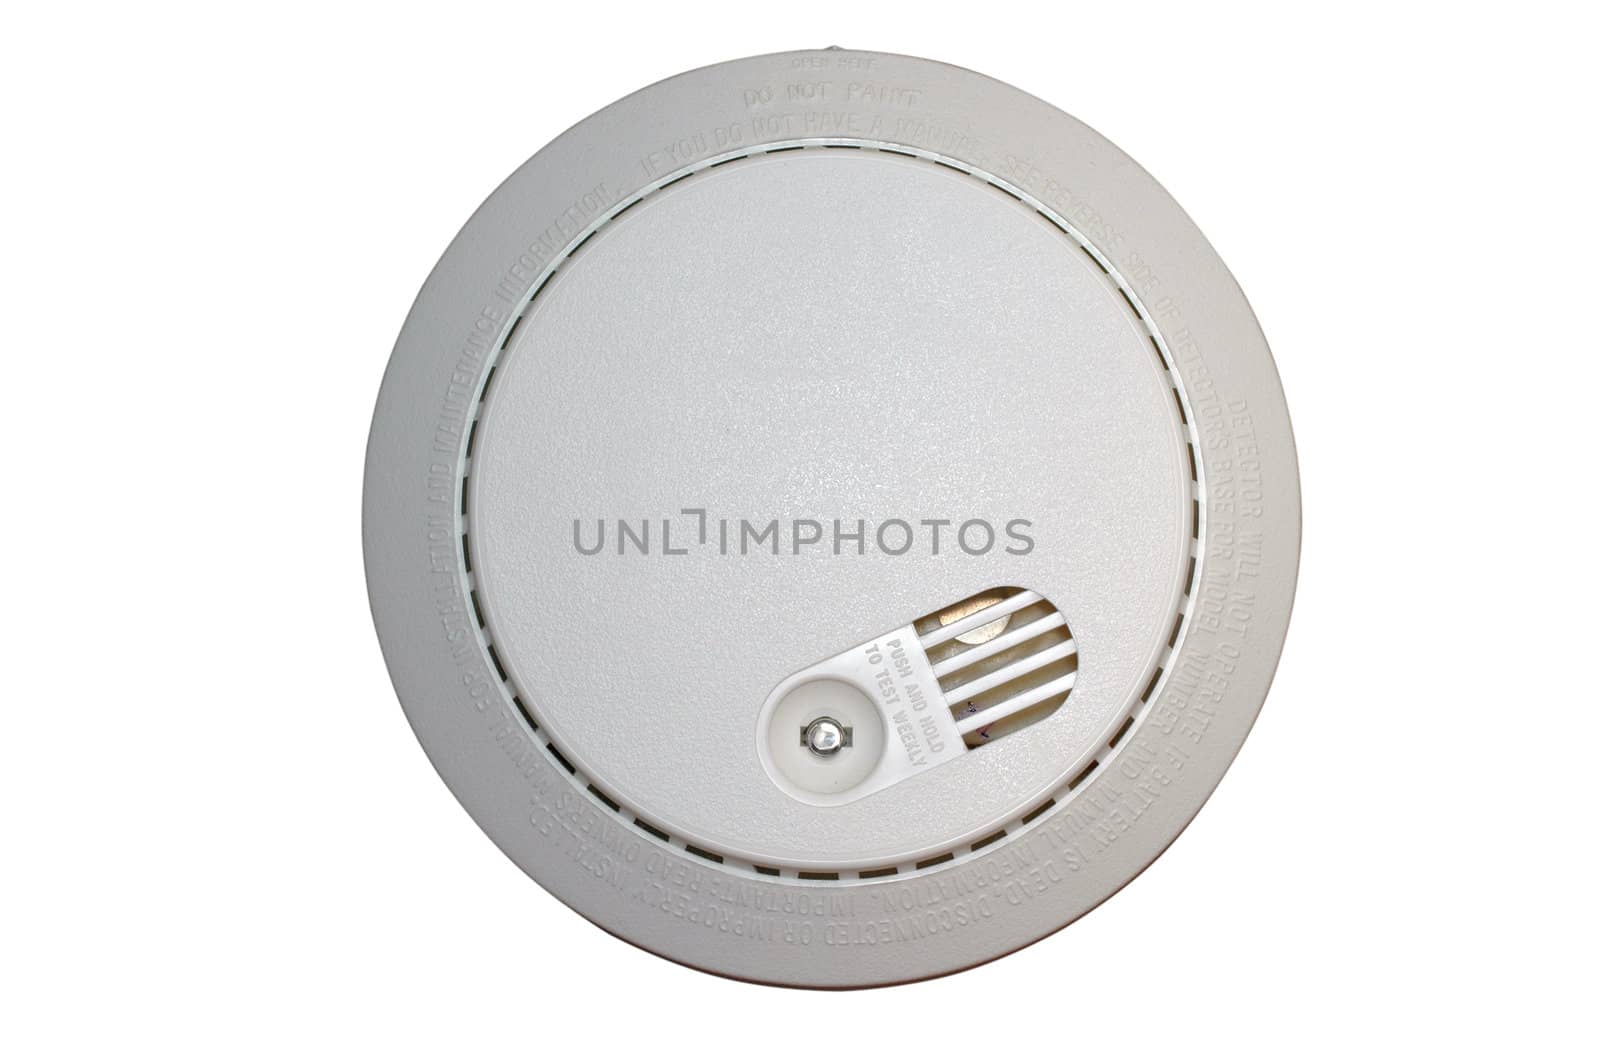 Smoke alarm with clipping path.